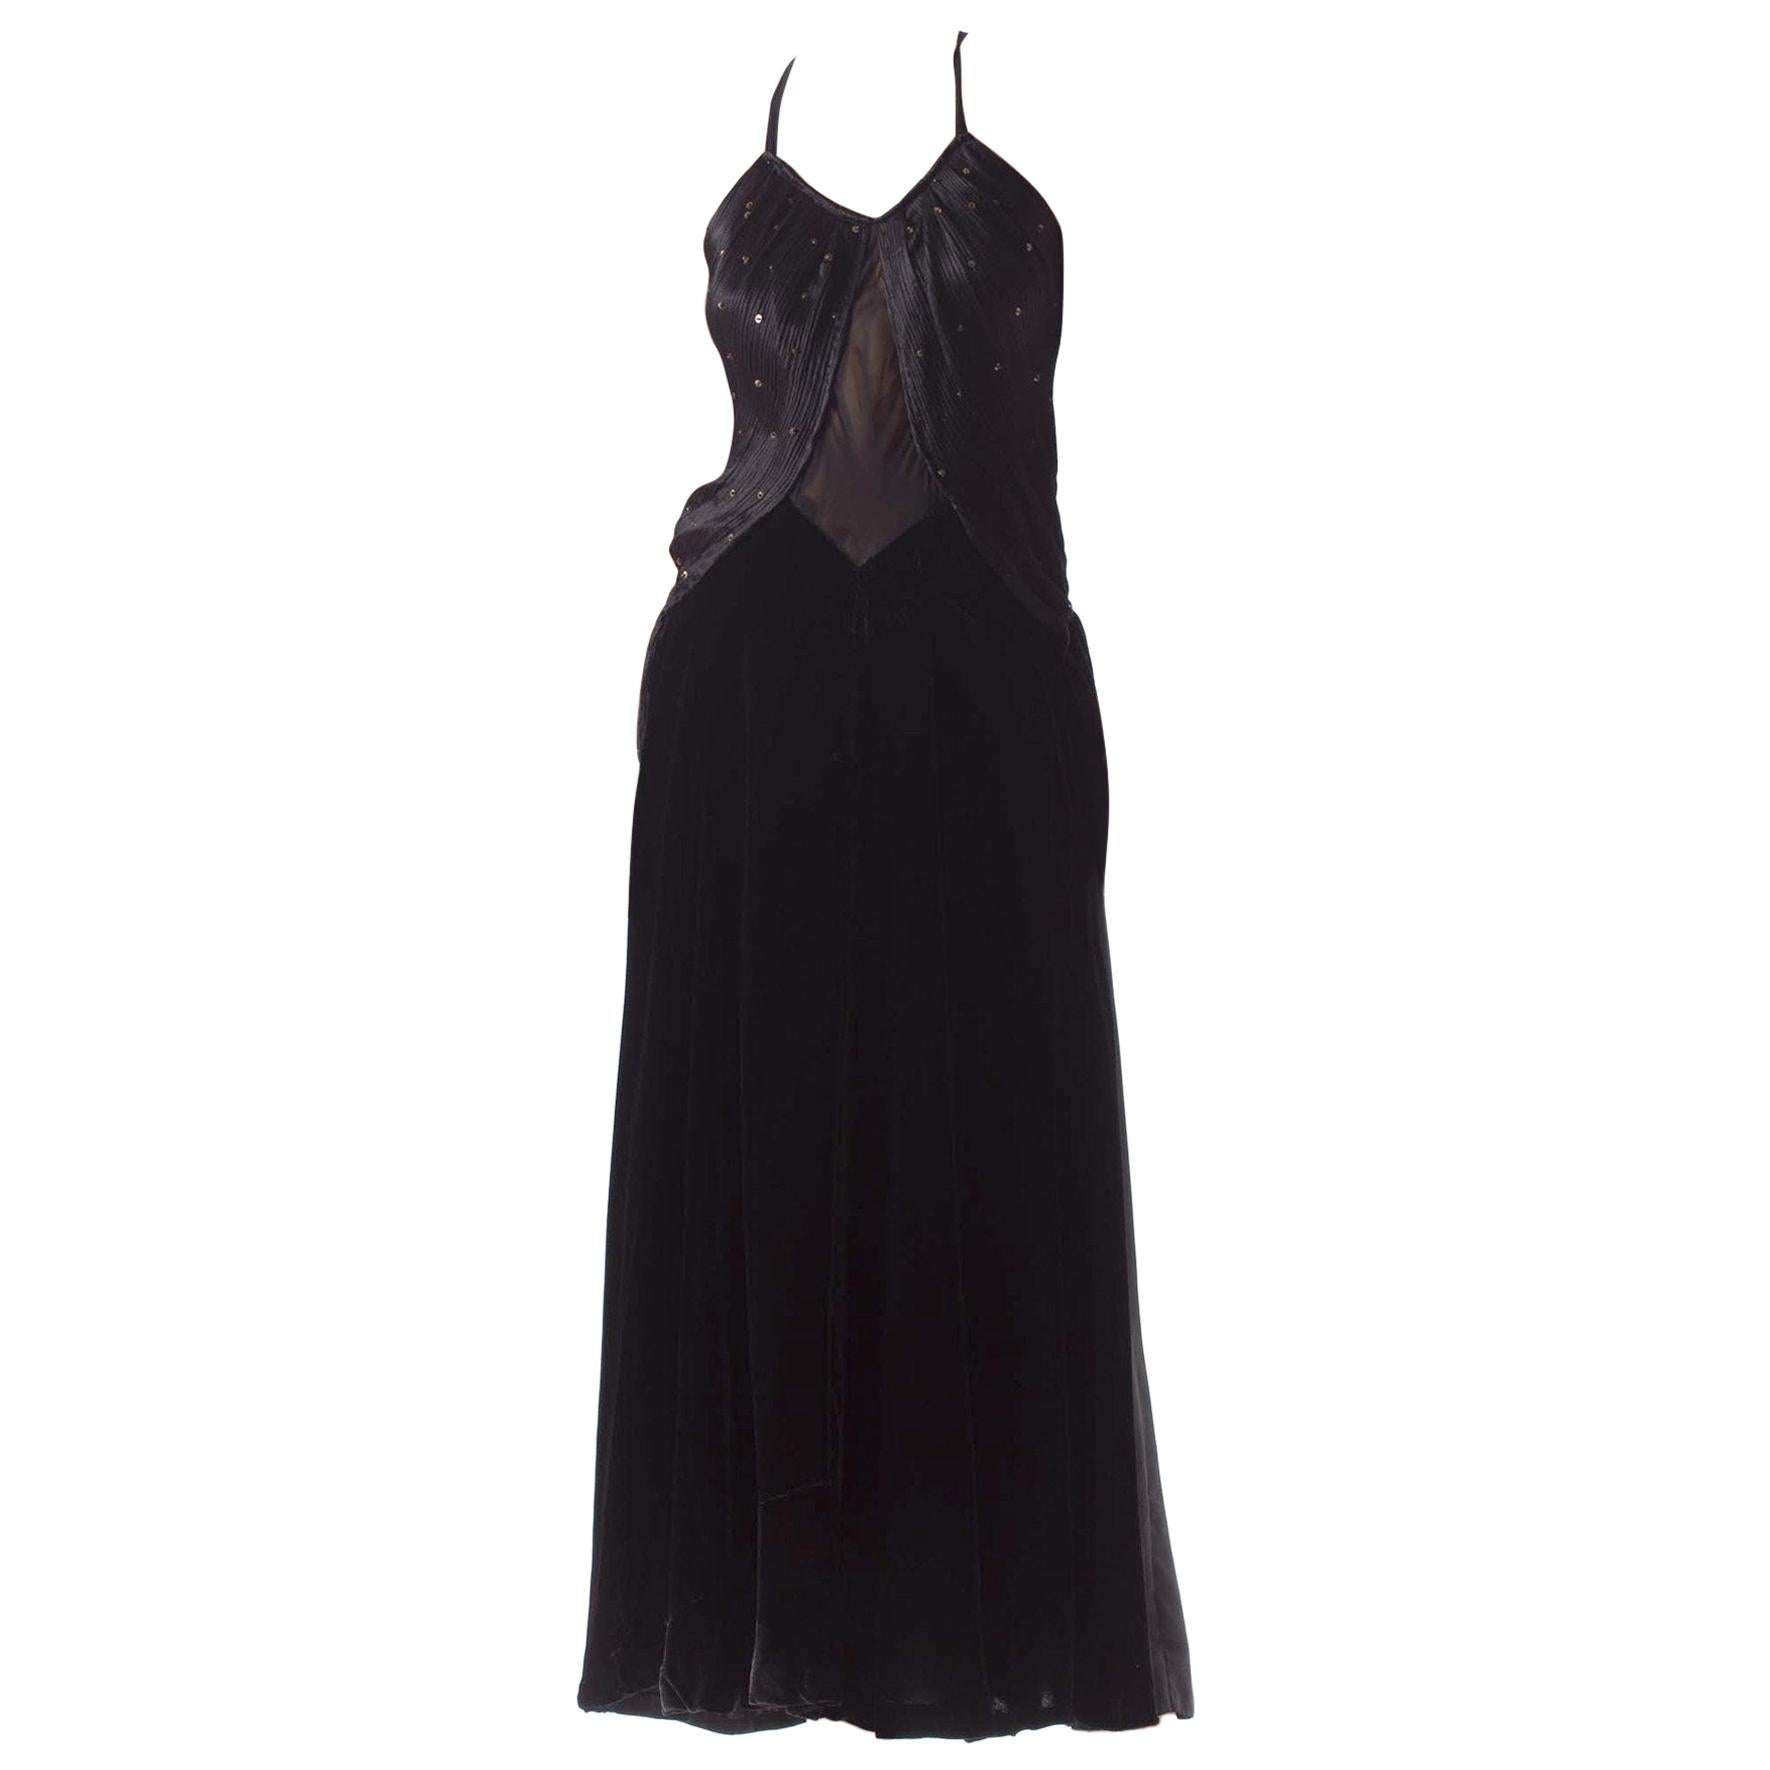 MORPHEW COLLECTION Black Backless Gown Made From Recycled 1930S Silk & Velvet